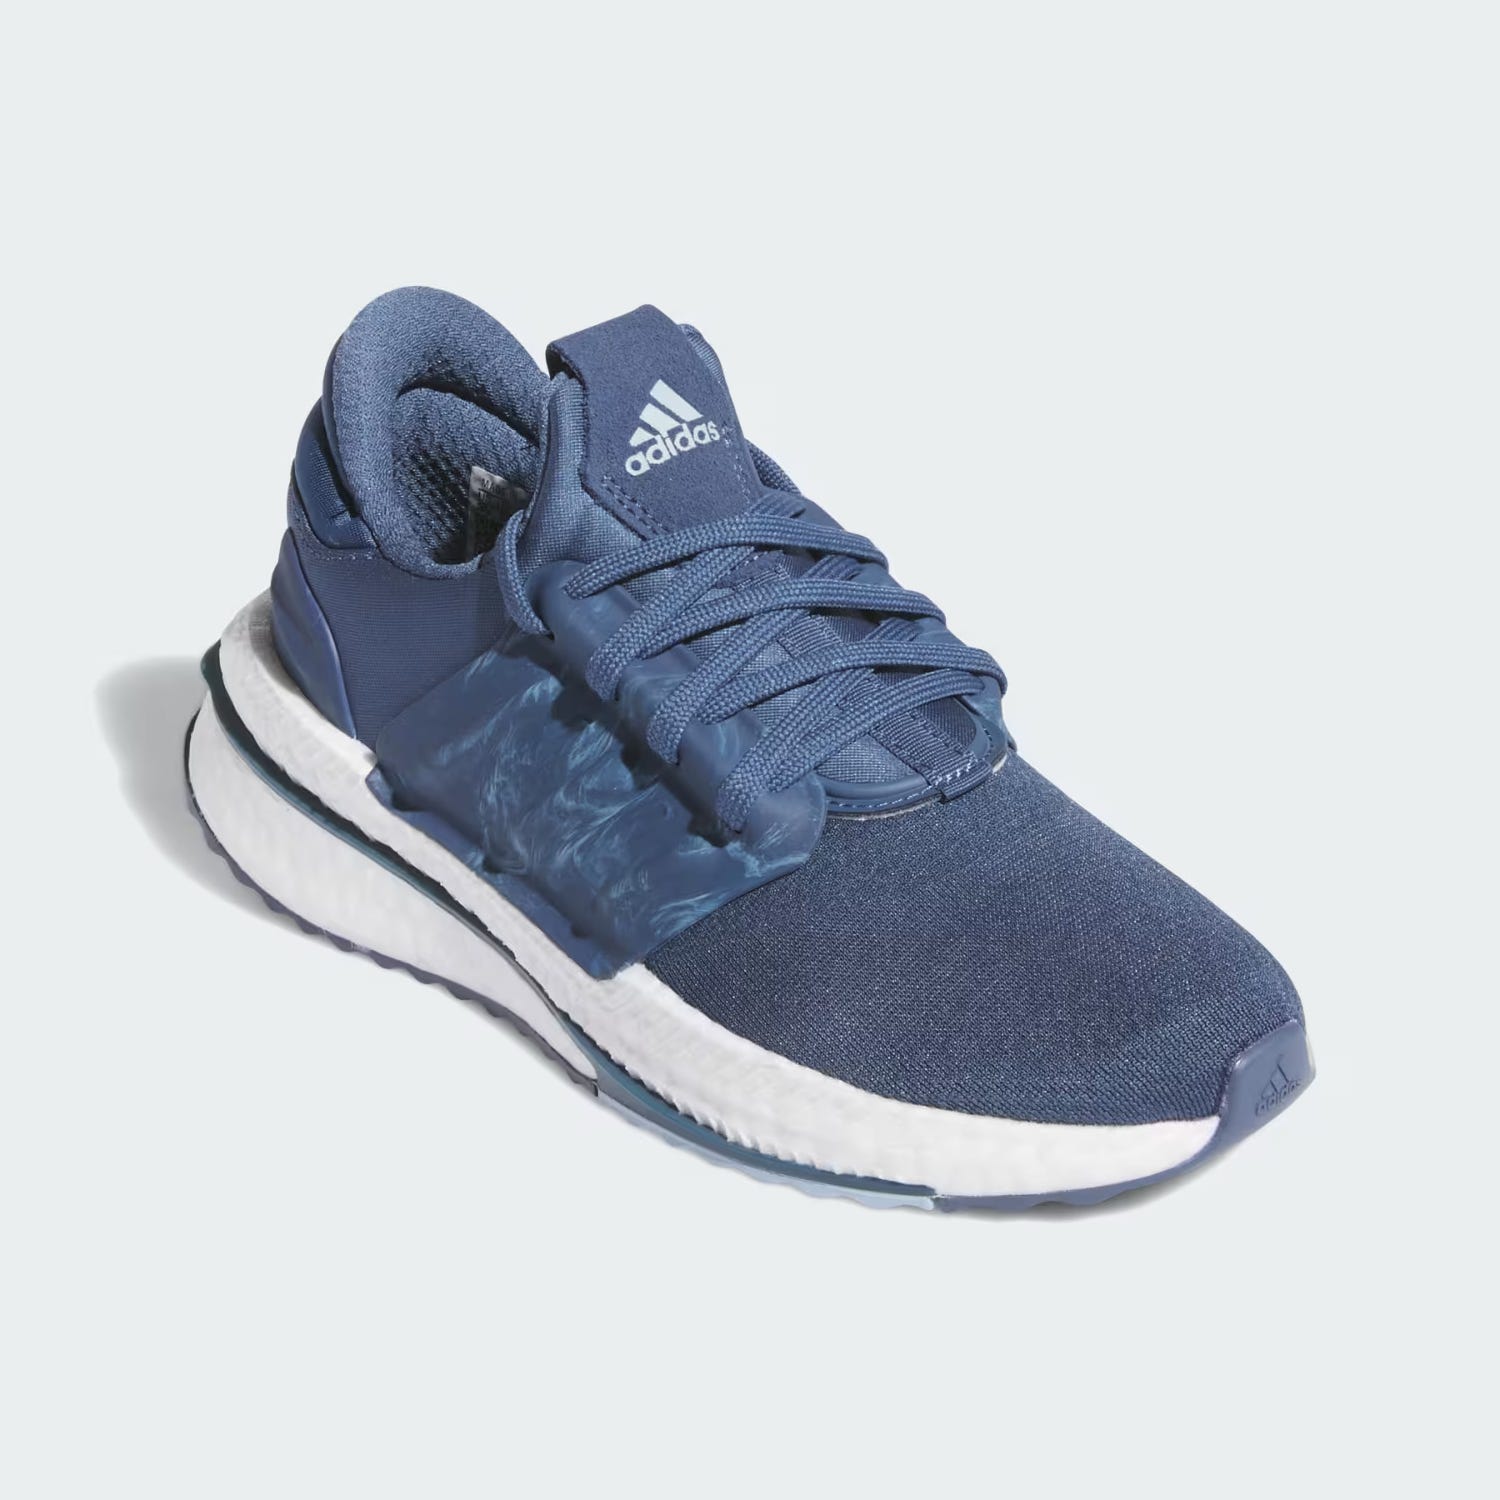 A single blue Adidas sneaker with white soles and distinctive cushioning.